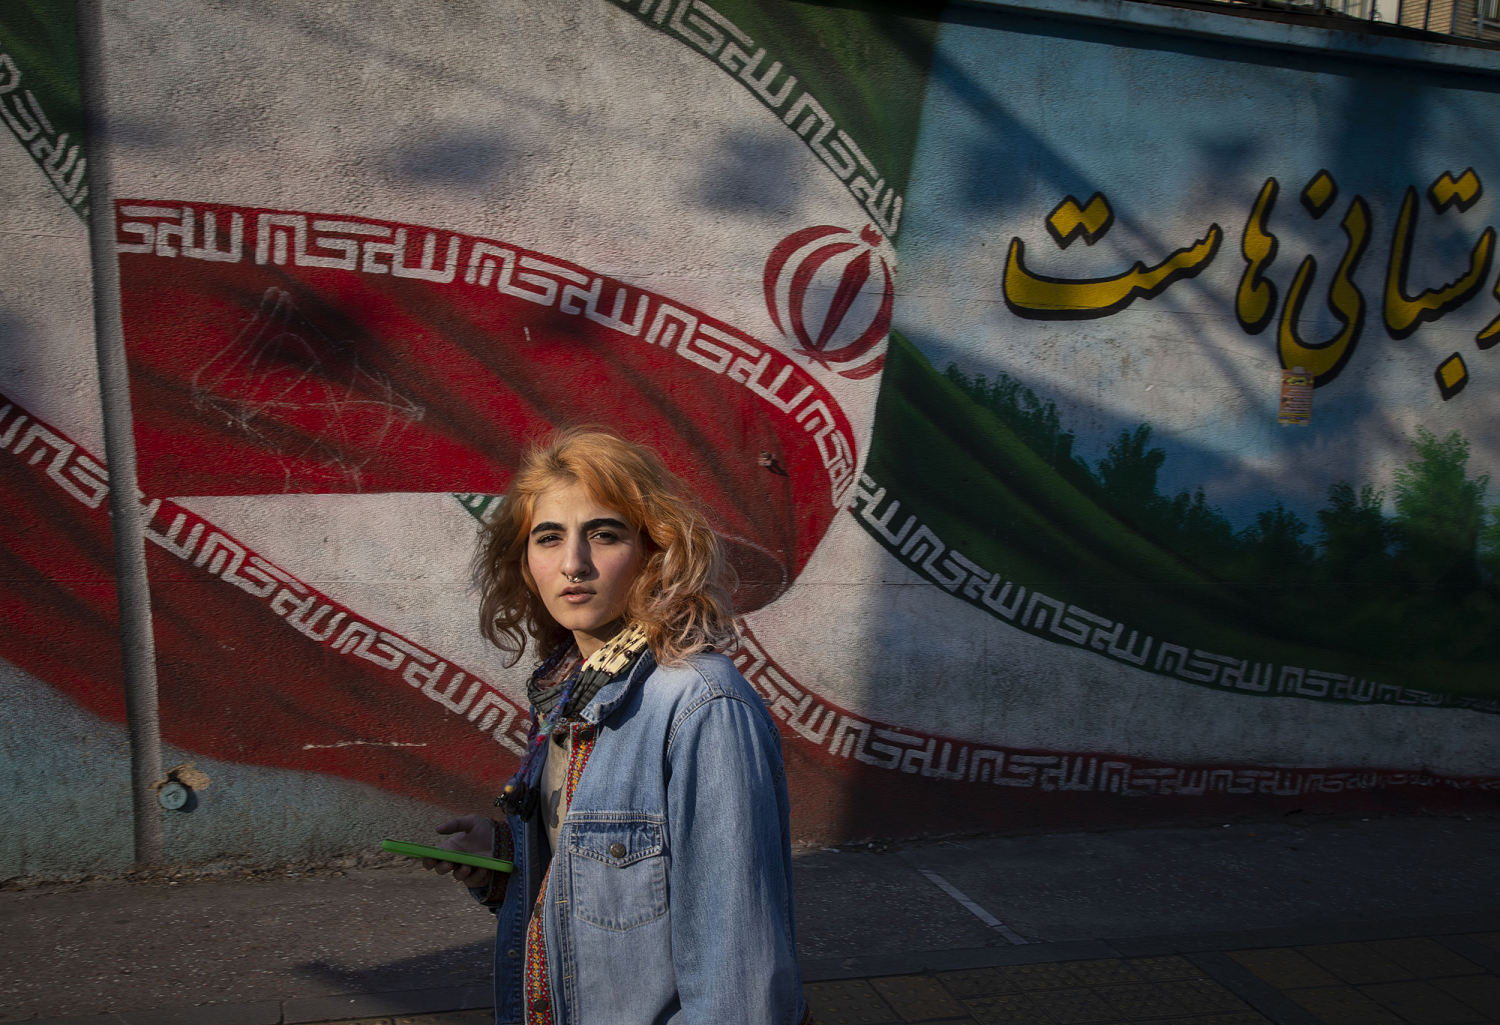 Iran has launched a new crackdown on women defying its strict dress code